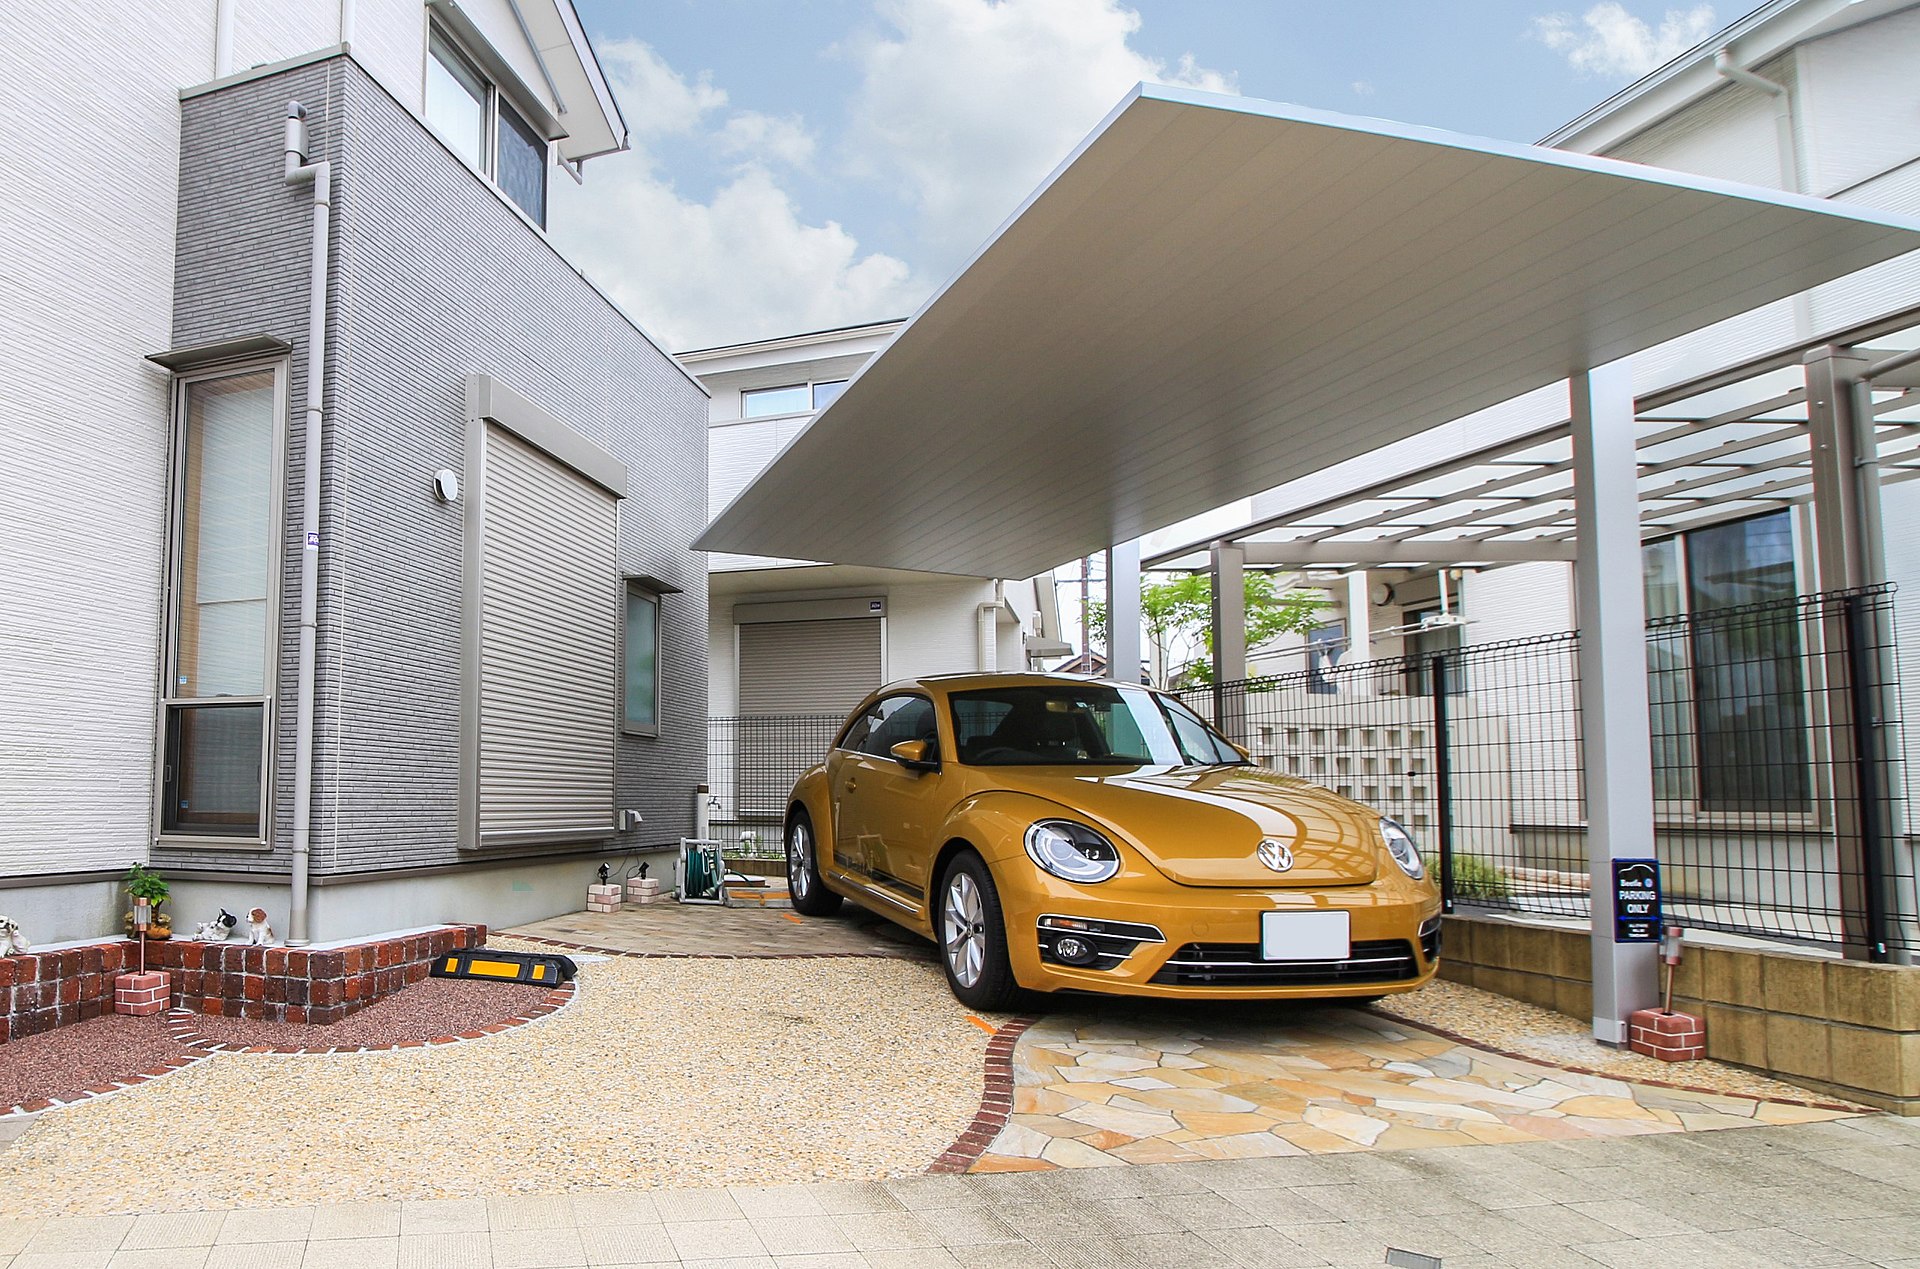 Reasons to Consider Investing in DIY Kits to Build a Carport